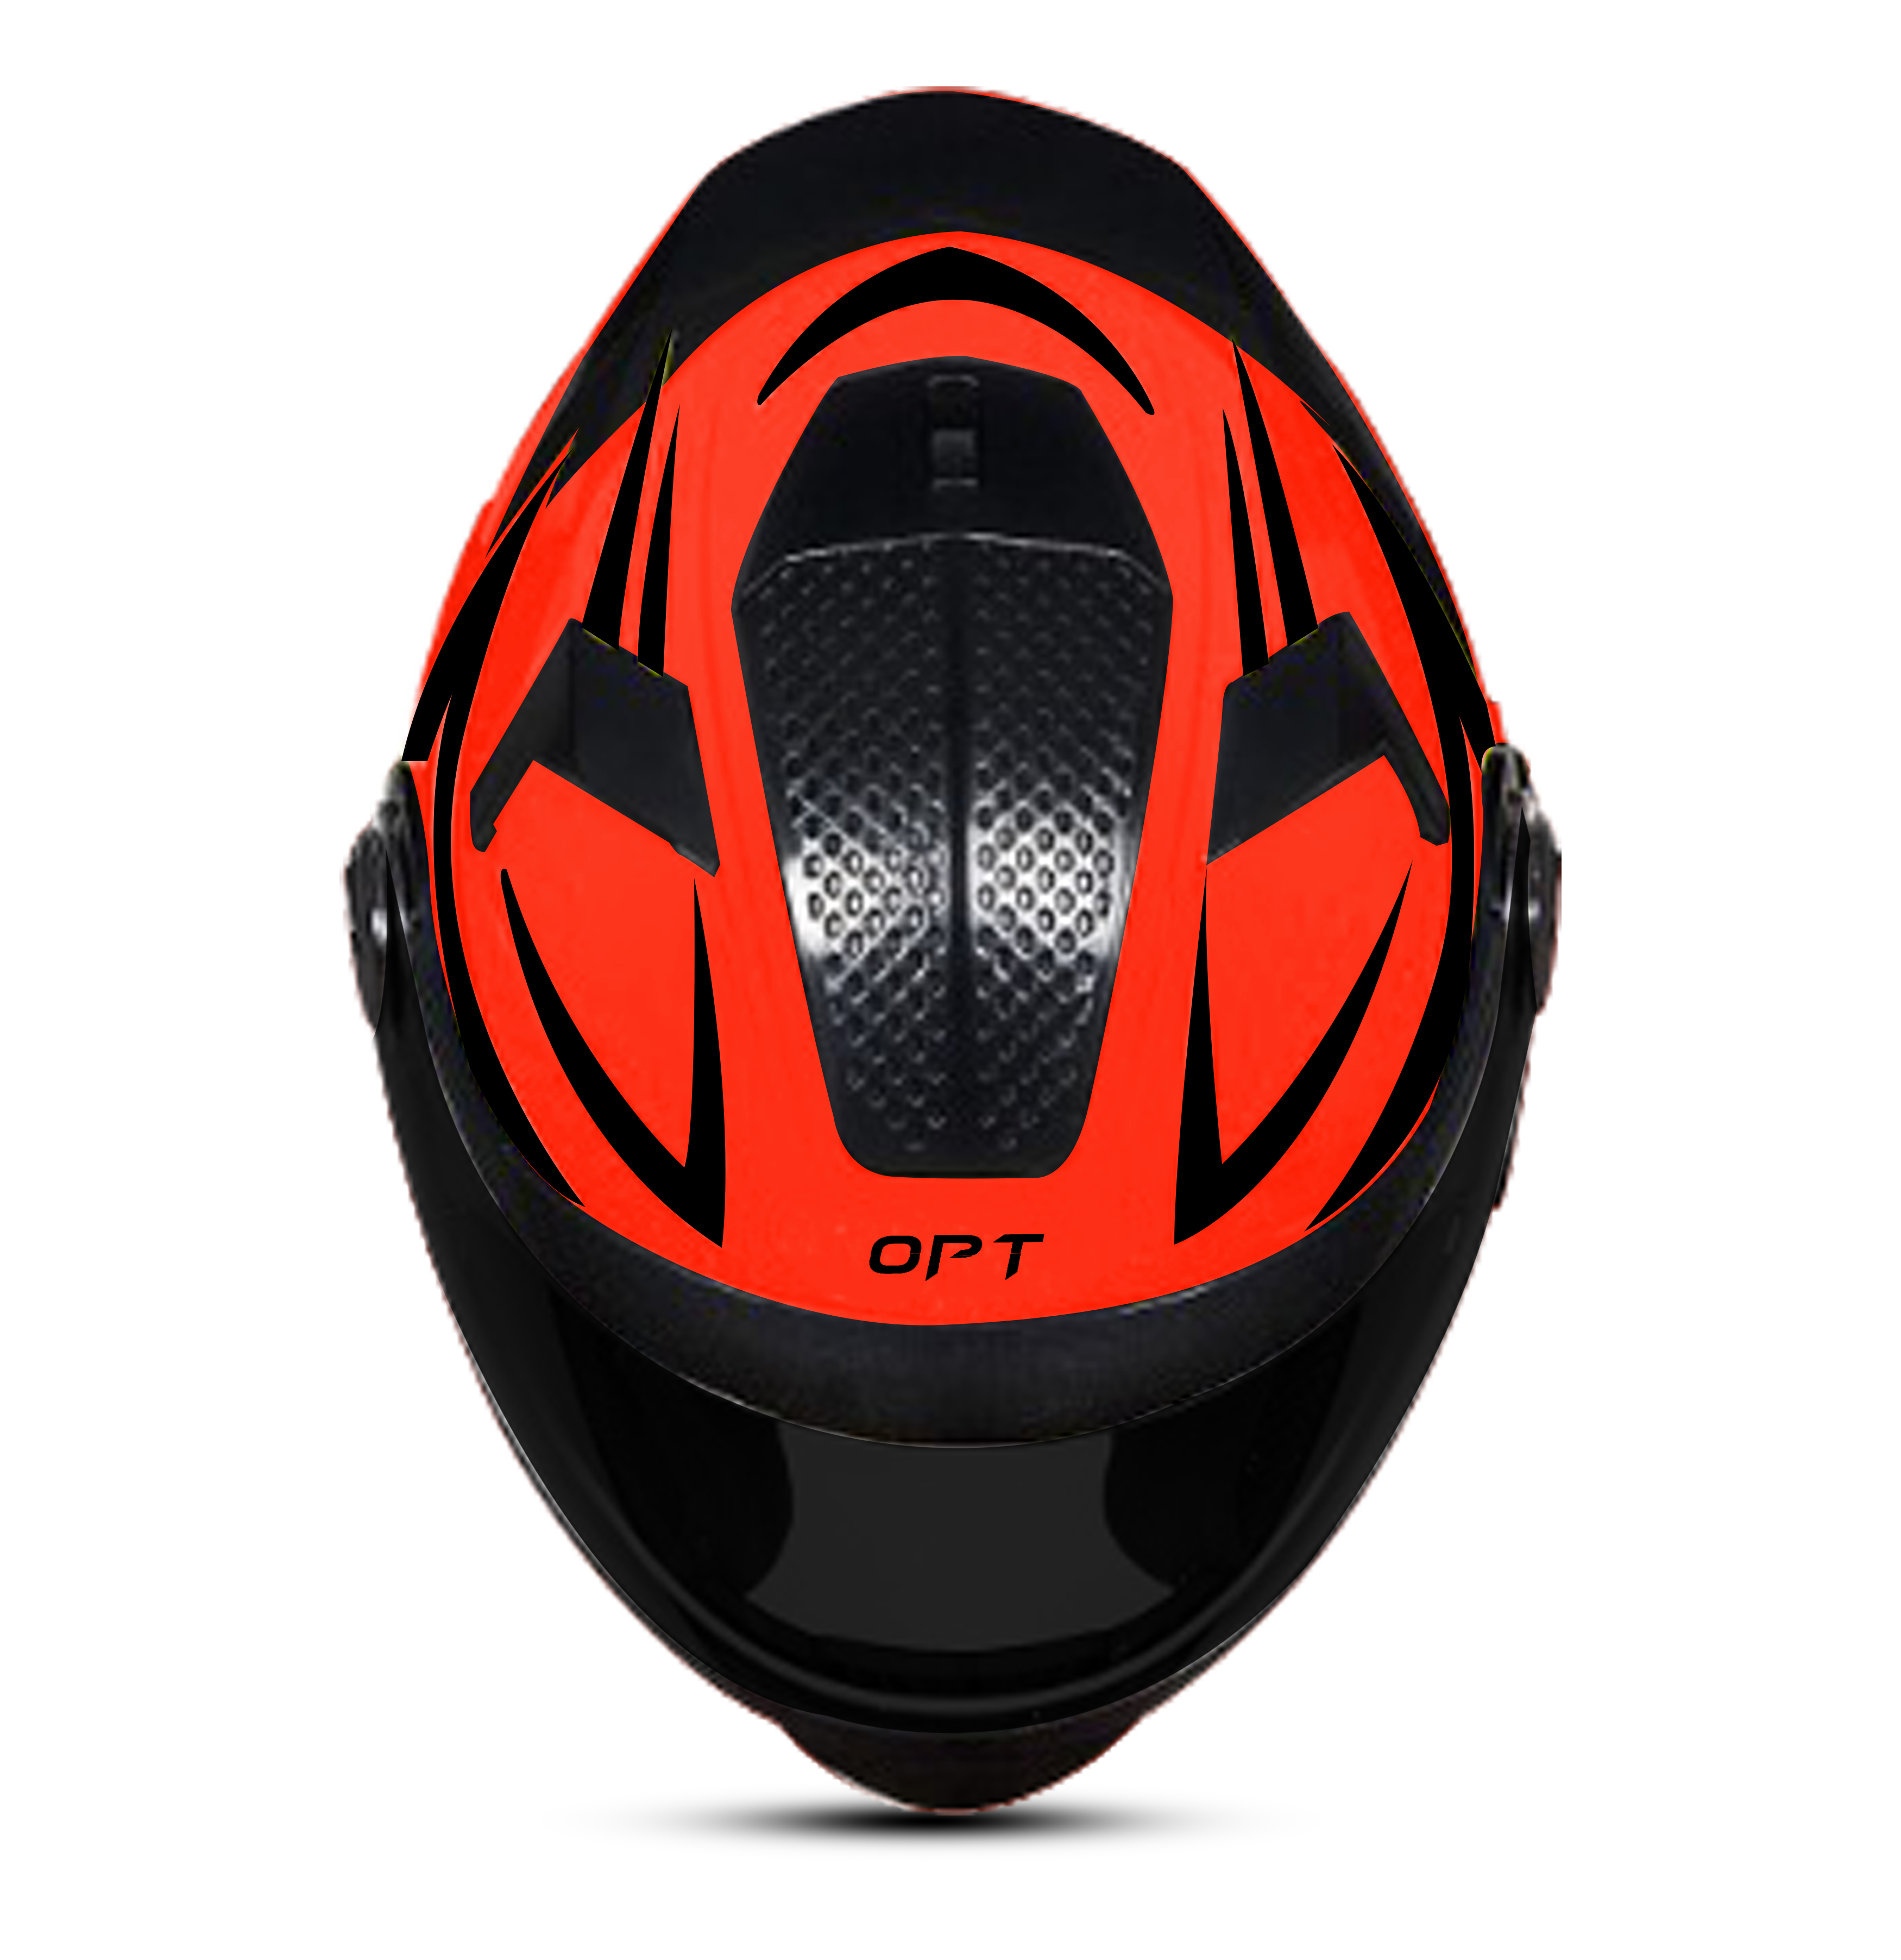 Steelbird 7Wings Robot Opt ISI Certified Full Face Helmet With Night Reflective Graphics (Glossy Fluo Red Black With Smoke Visor)